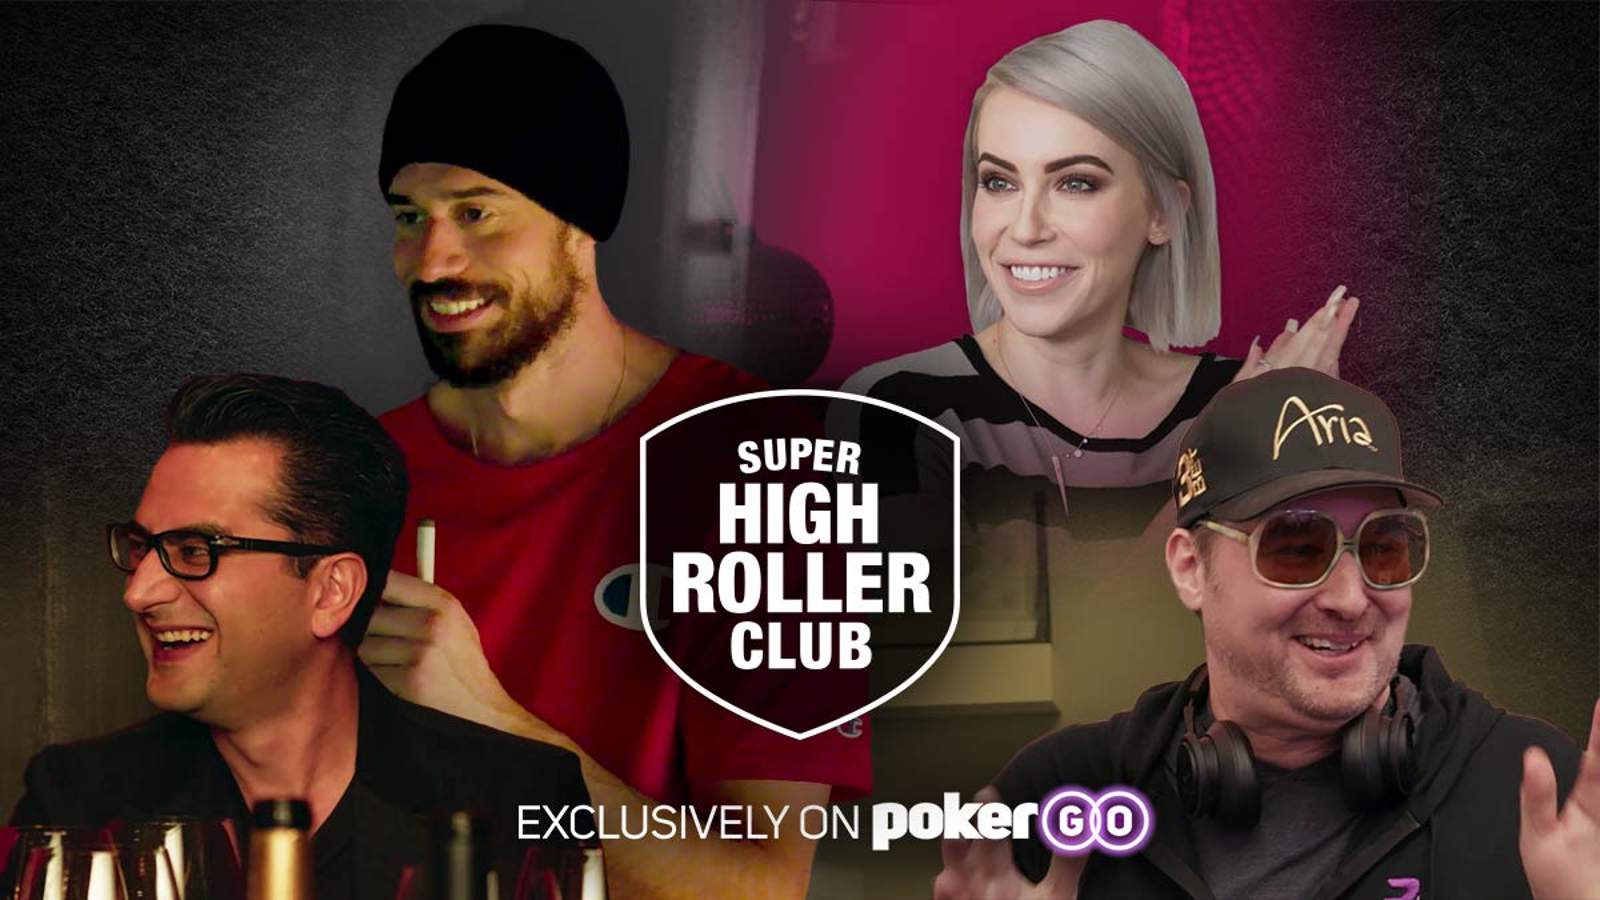 Poker Central Partners with Believe Entertainment Group to Produce New Lifestyle Series